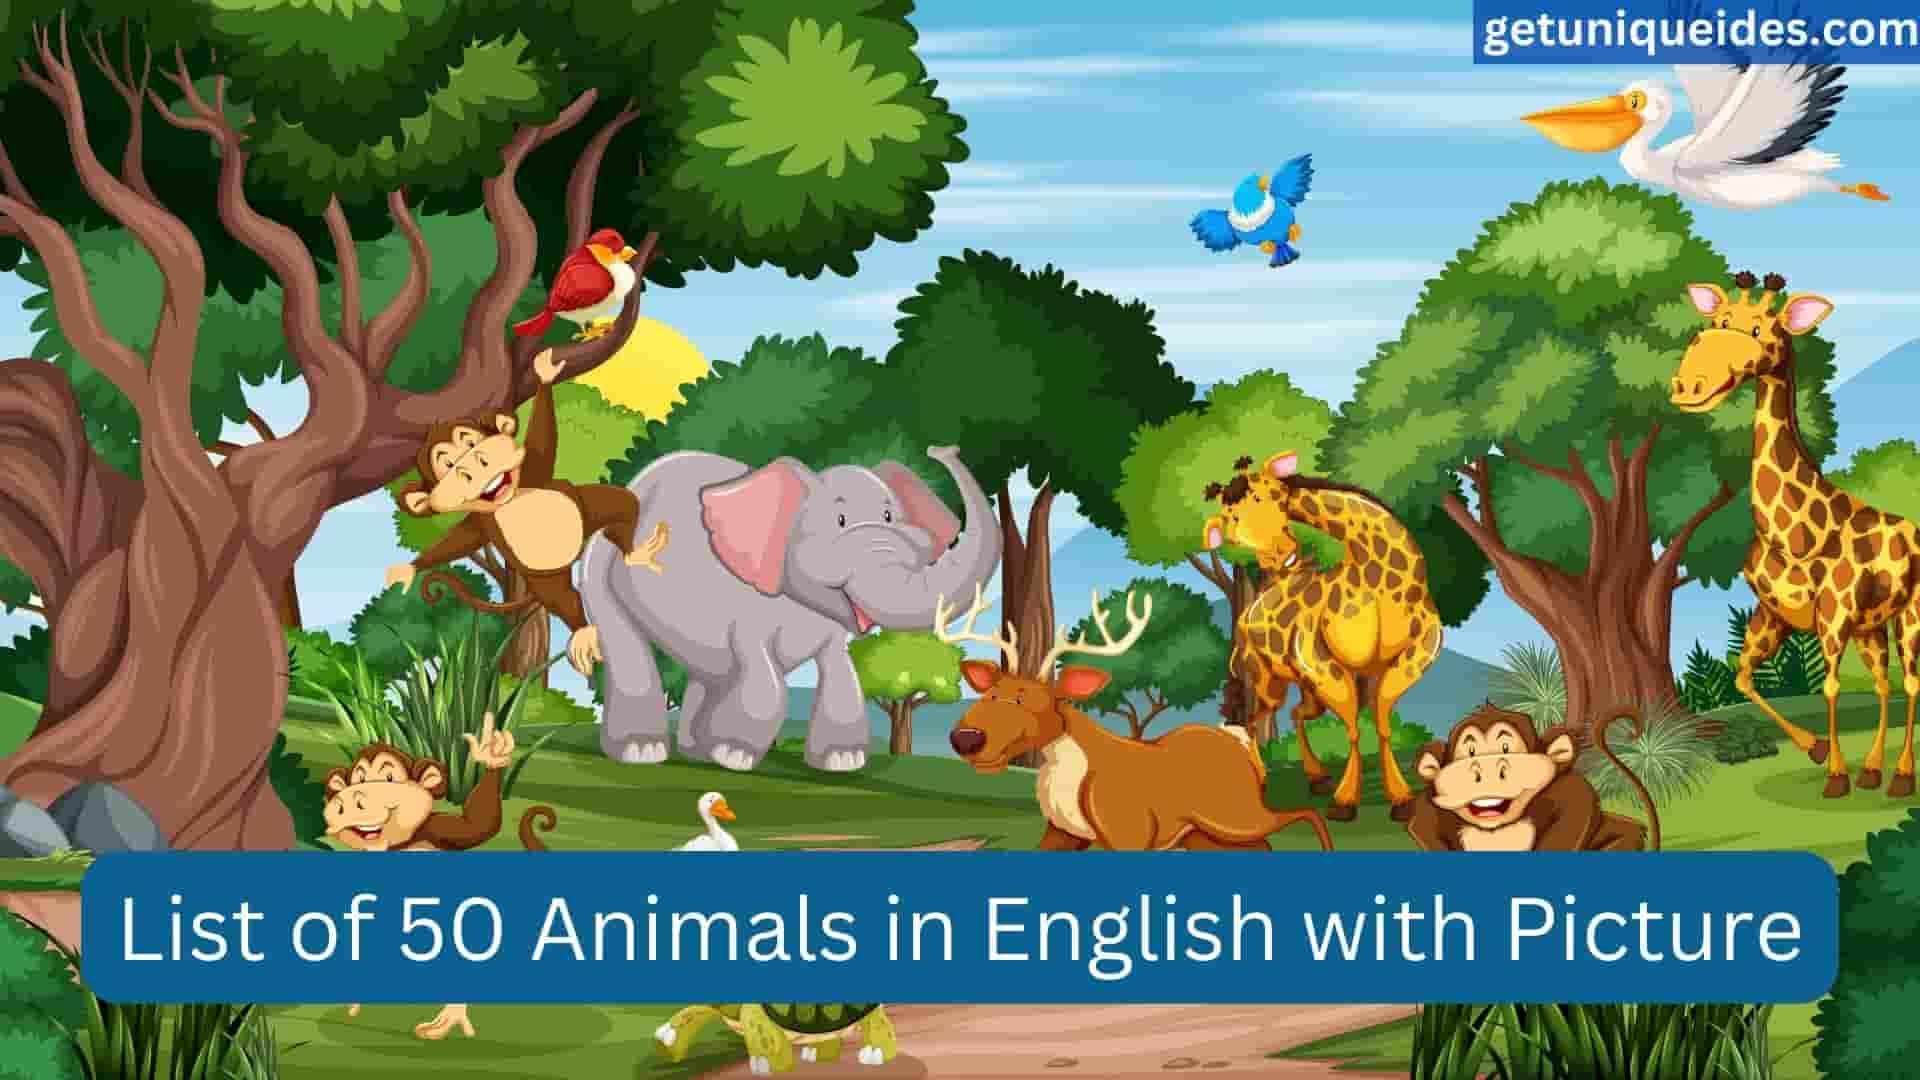 List of 50 Animals in English with Picture